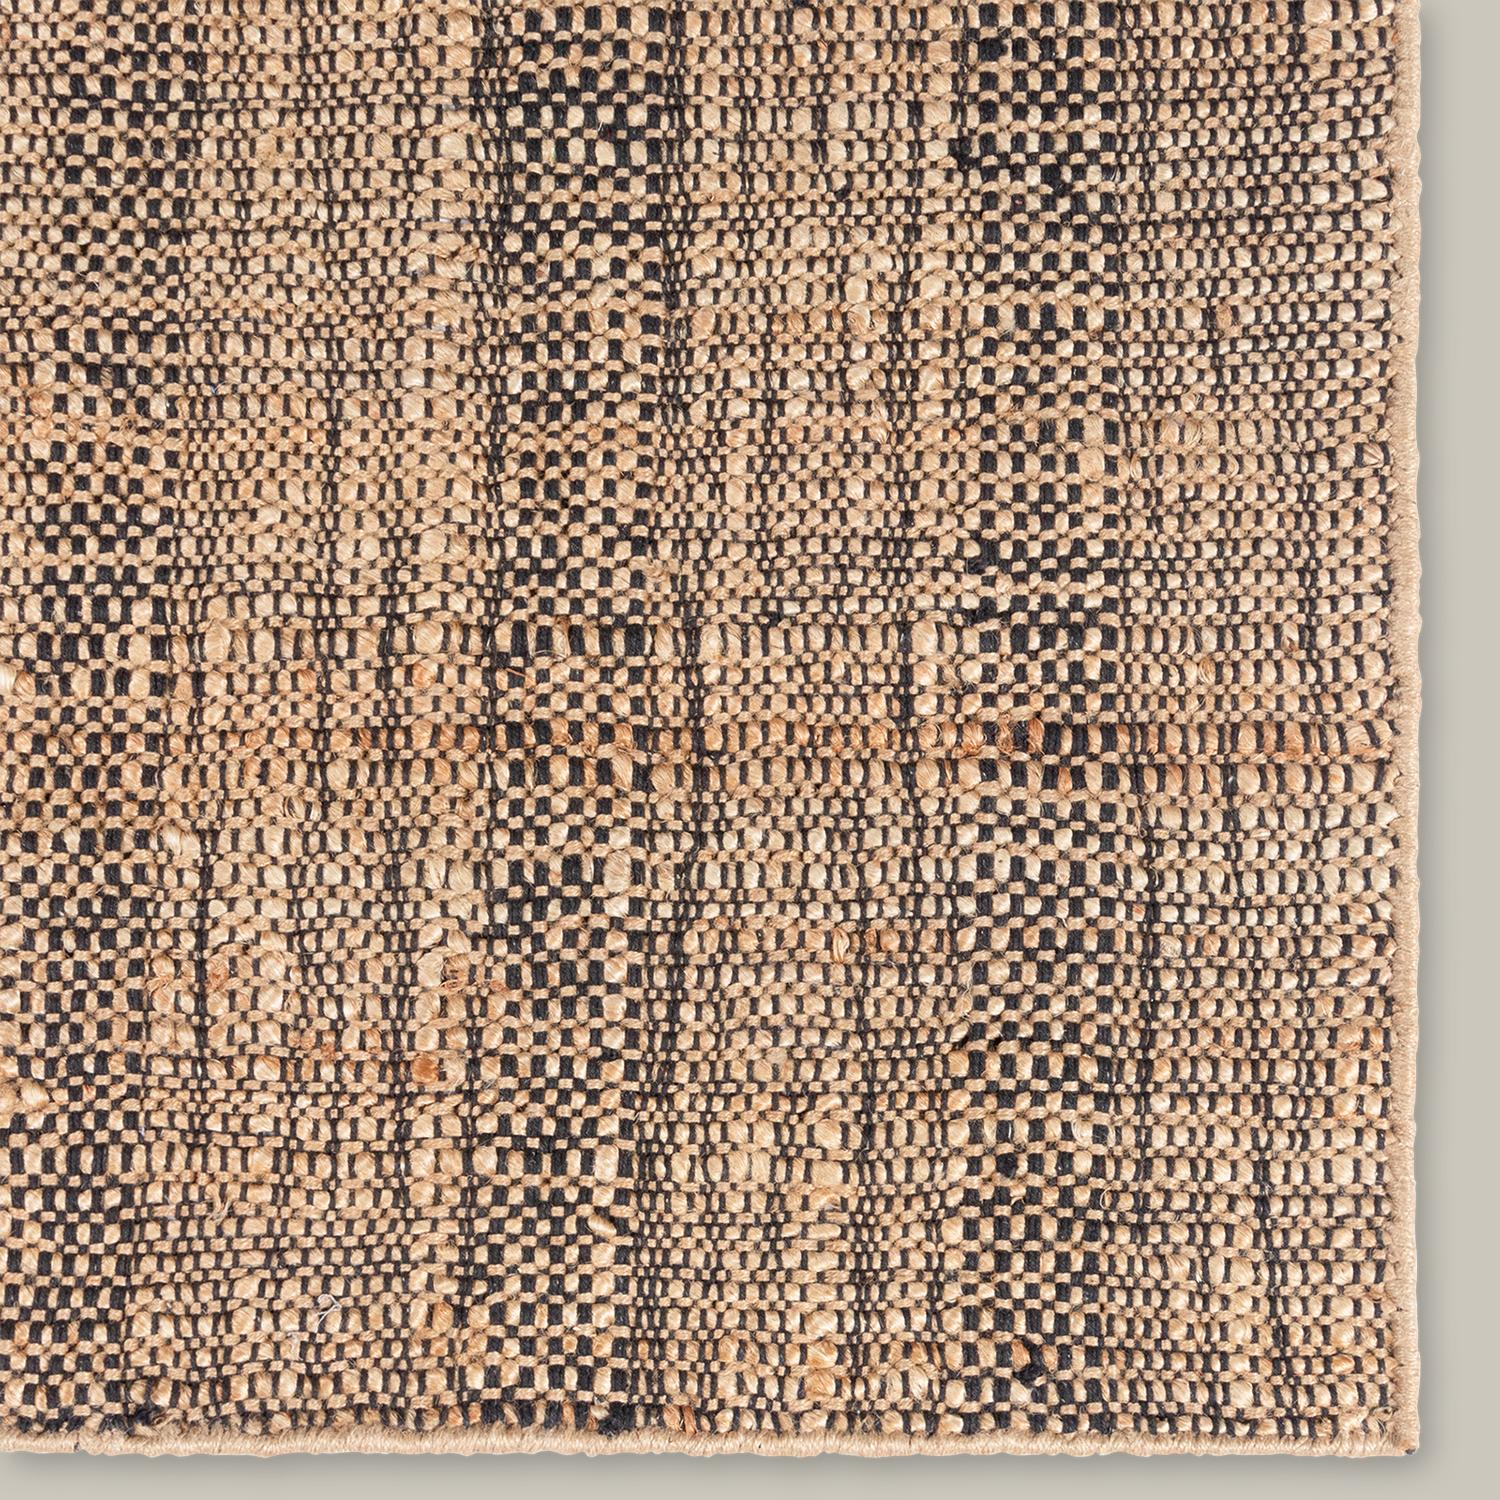 The quality of the line pattern sets the Moghar Collection apart. A handwoven jute flatweave, the subtle gradations of color work together to create an elevated basic. Built for layering, the wonky lines and irregular texture all have a very